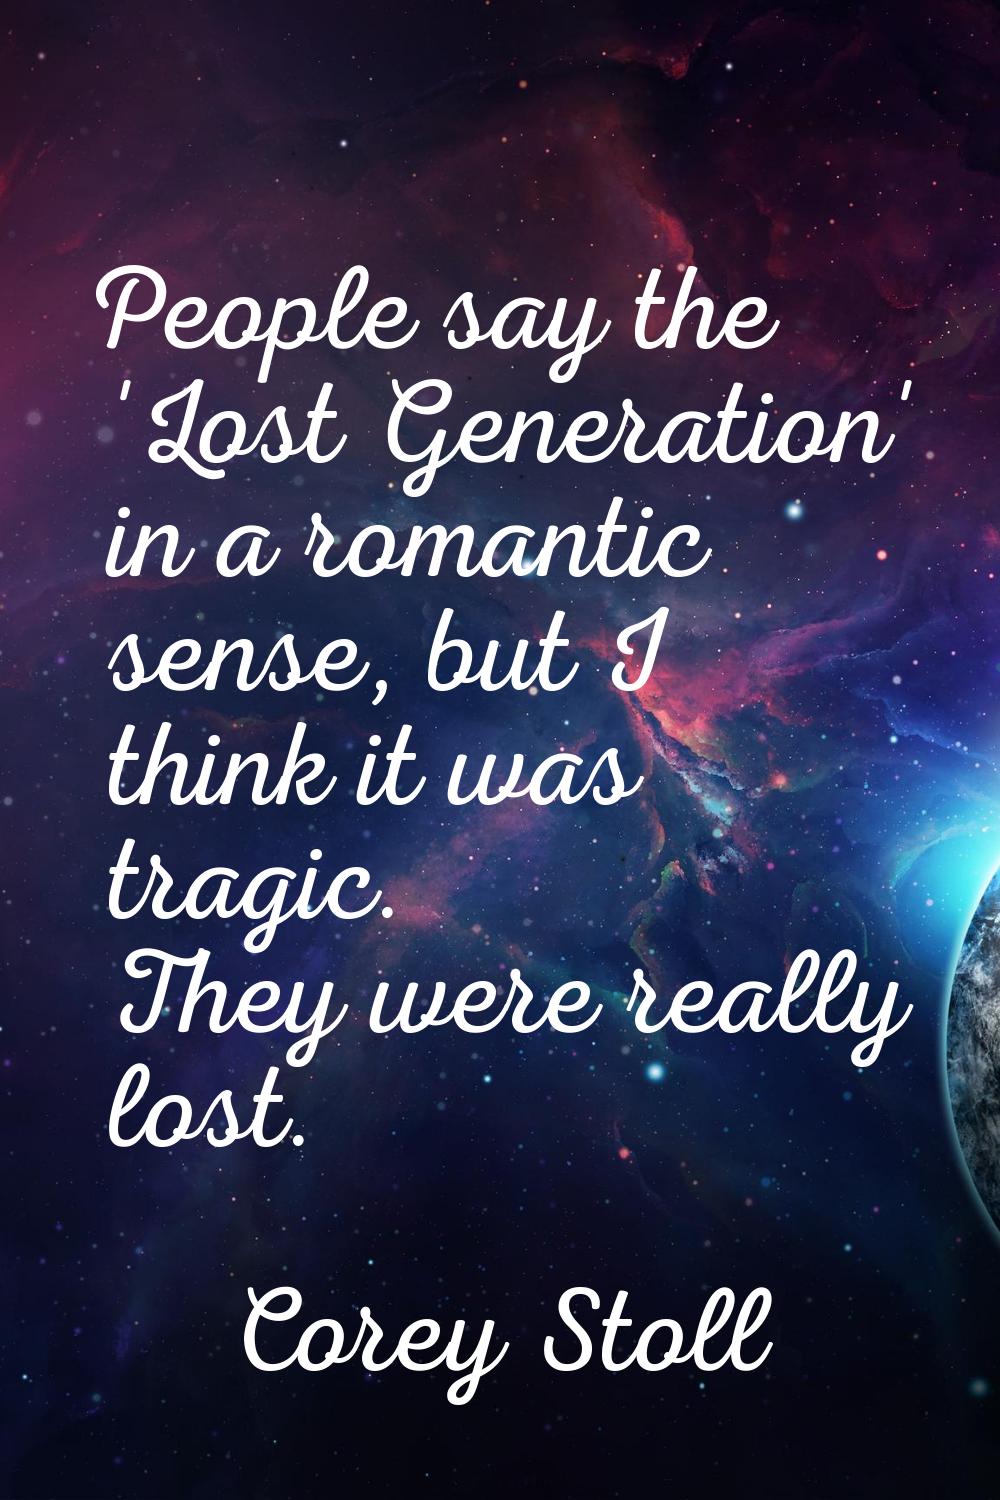 People say the 'Lost Generation' in a romantic sense, but I think it was tragic. They were really l